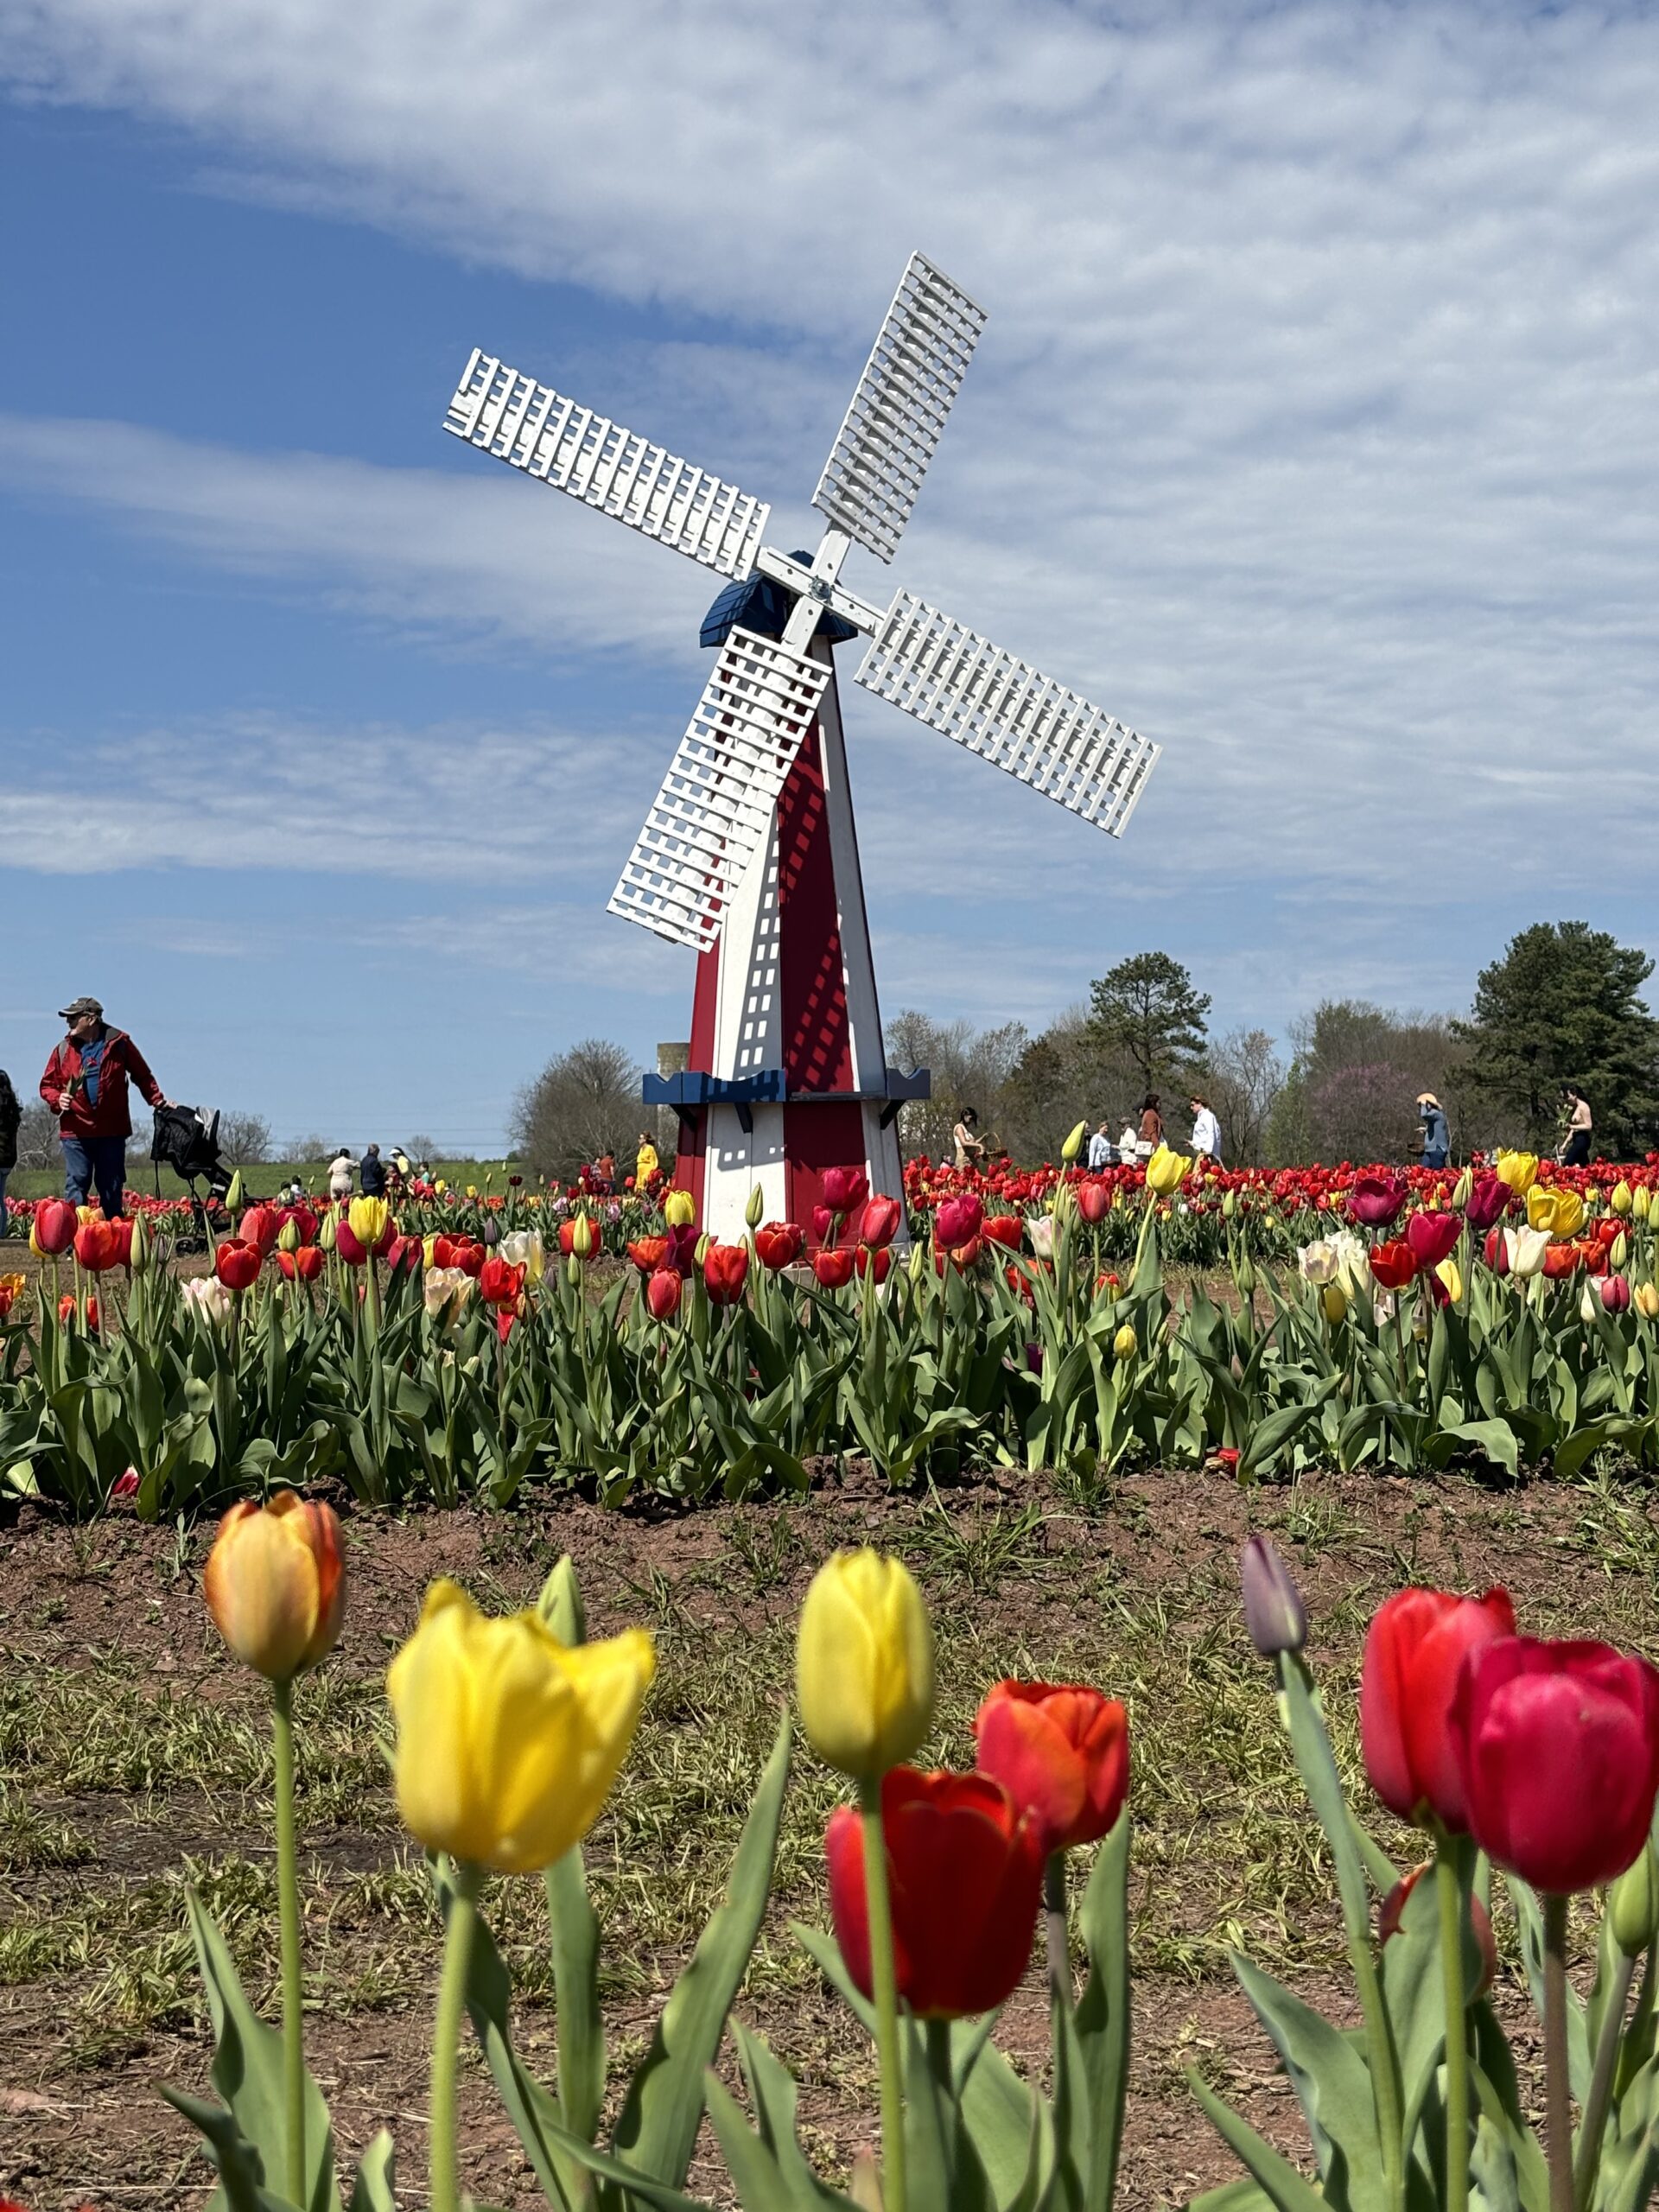 white, red, and blue windmill surrounded by colorful tulips